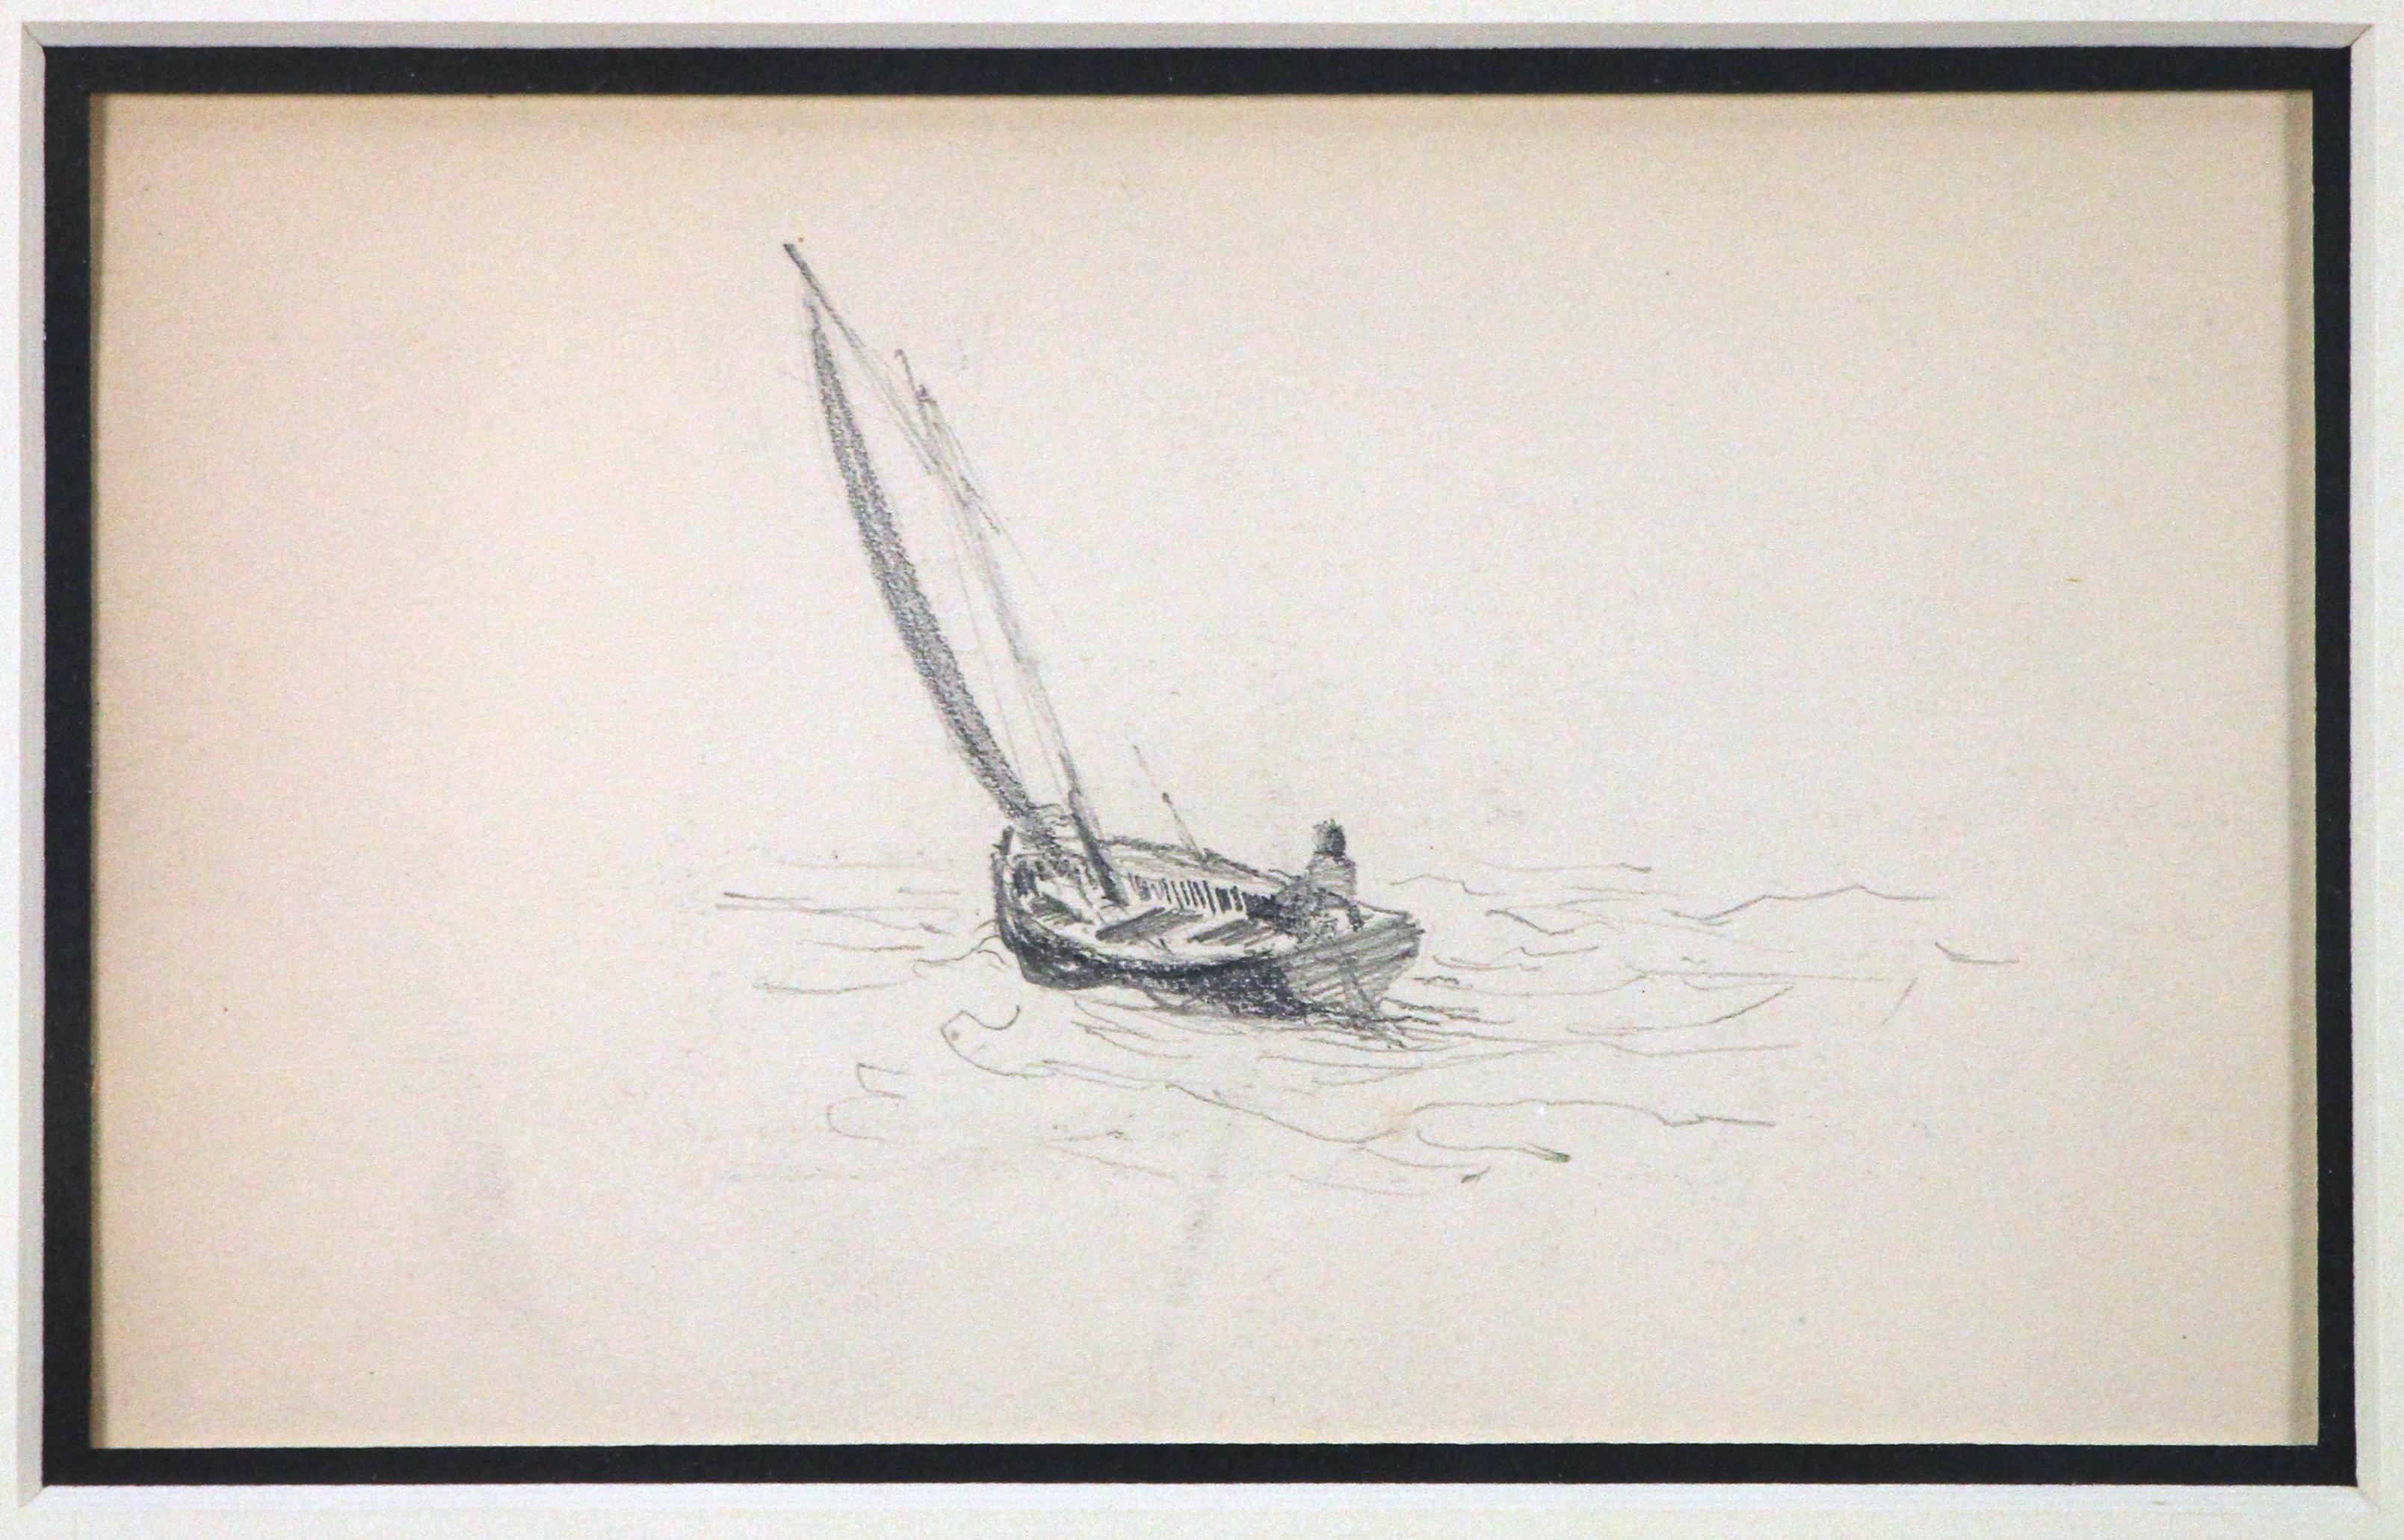 Two Sailboats, American Impressionist, Pencil Drawings on Paper, 1899 - Art by Henry Bayley Snell